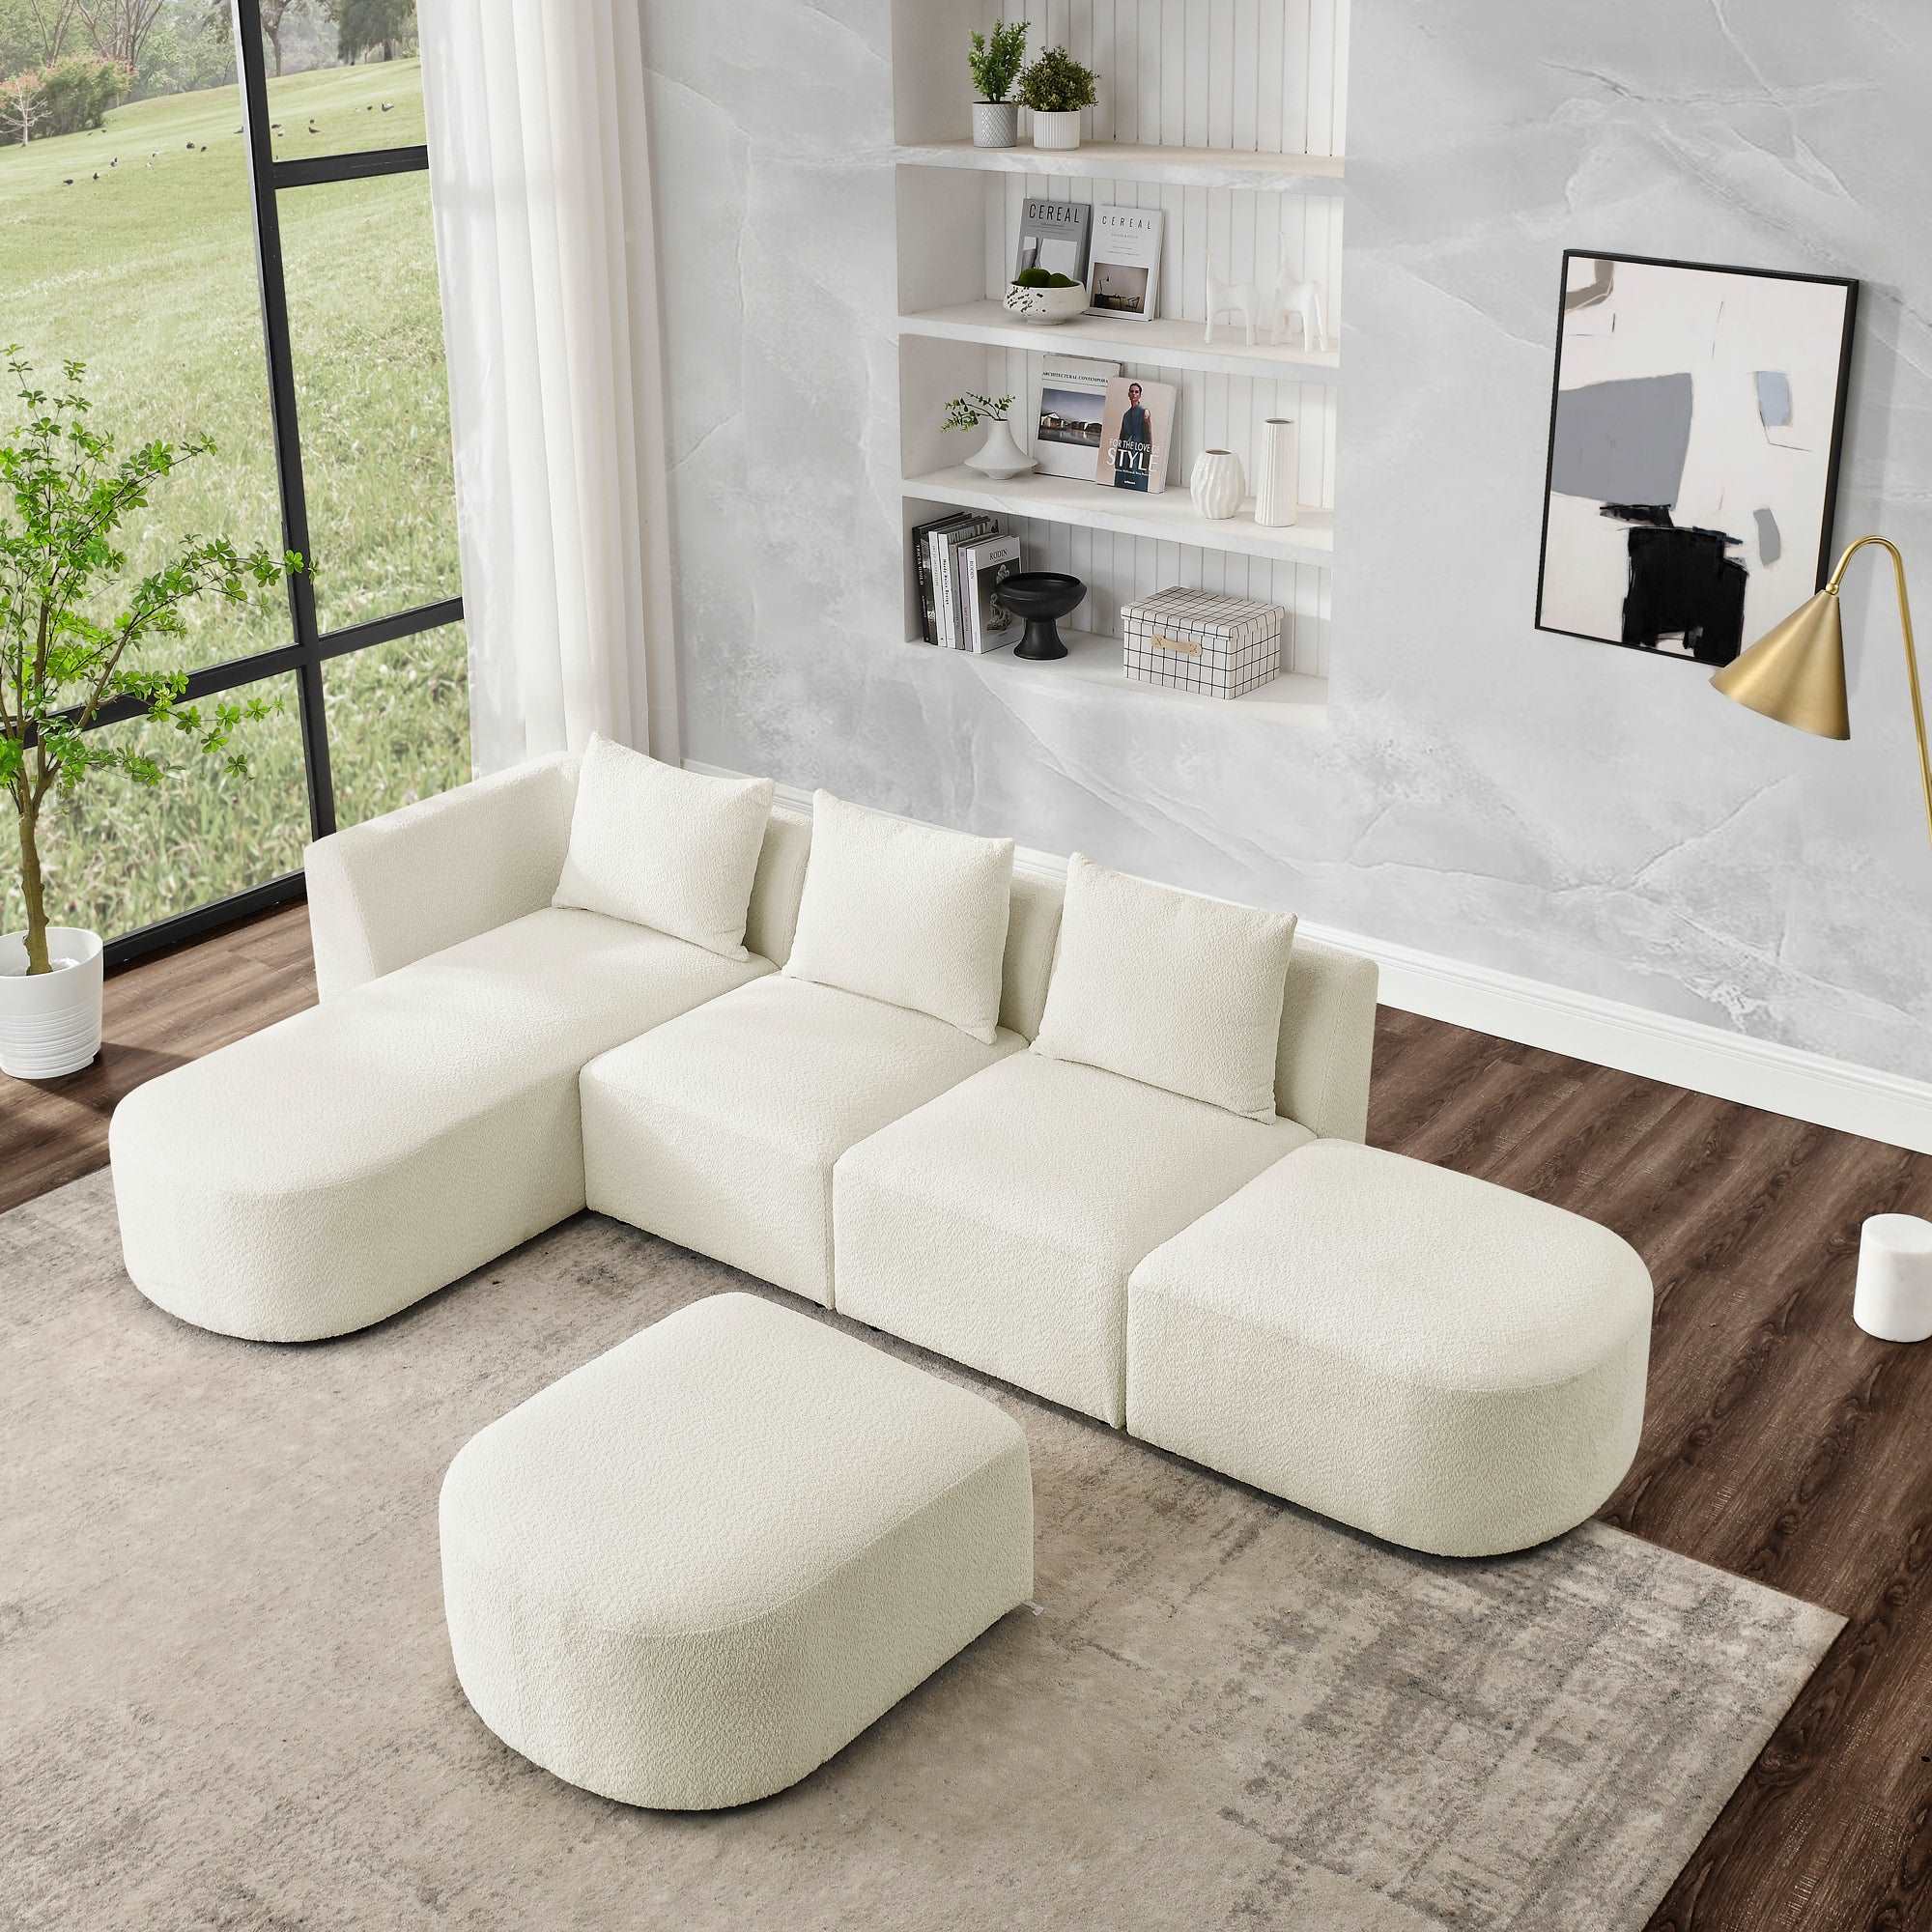 Bellemave 113" L-Shape Sectional Sofa with Left Side Chaise and Ottoman, Modular Sofa, DIY Combination